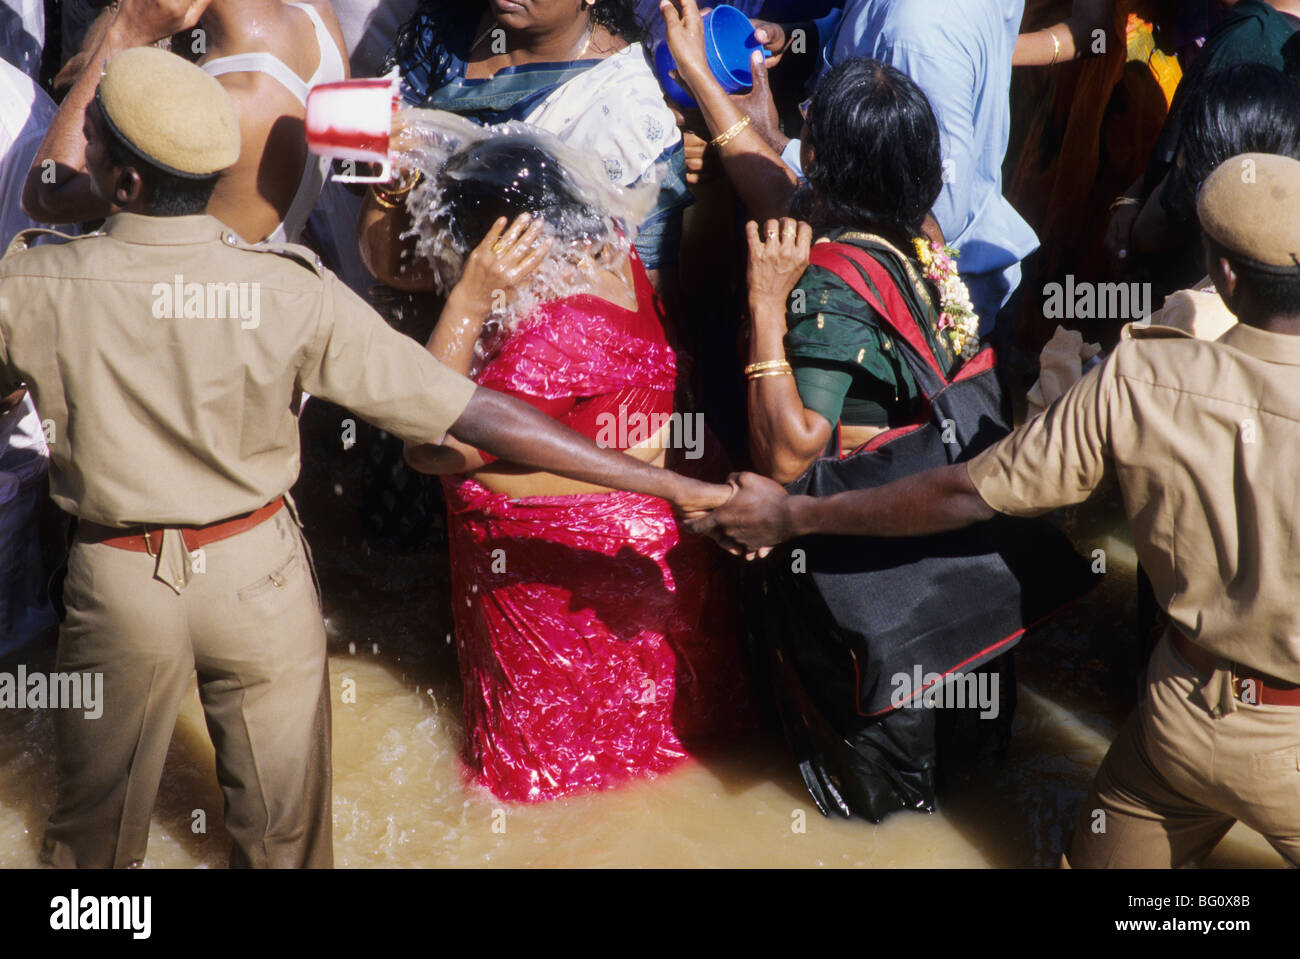 Policemen are keeping order as pilgrims and devotees take a holy dip and splash water on one another in the Mahamaham temple tank during the Hindu Kumb Mela festival that is celebrated every 12 years in a small temple-town called Kumbakonam in the state of Tamil Nadu, India. It is believed that taking a bath or sprinkling water of the tank on their bodies will cleanse them of all their sins. This festival, called the Mahamaham festival, took place in March of 2004. Stock Photo